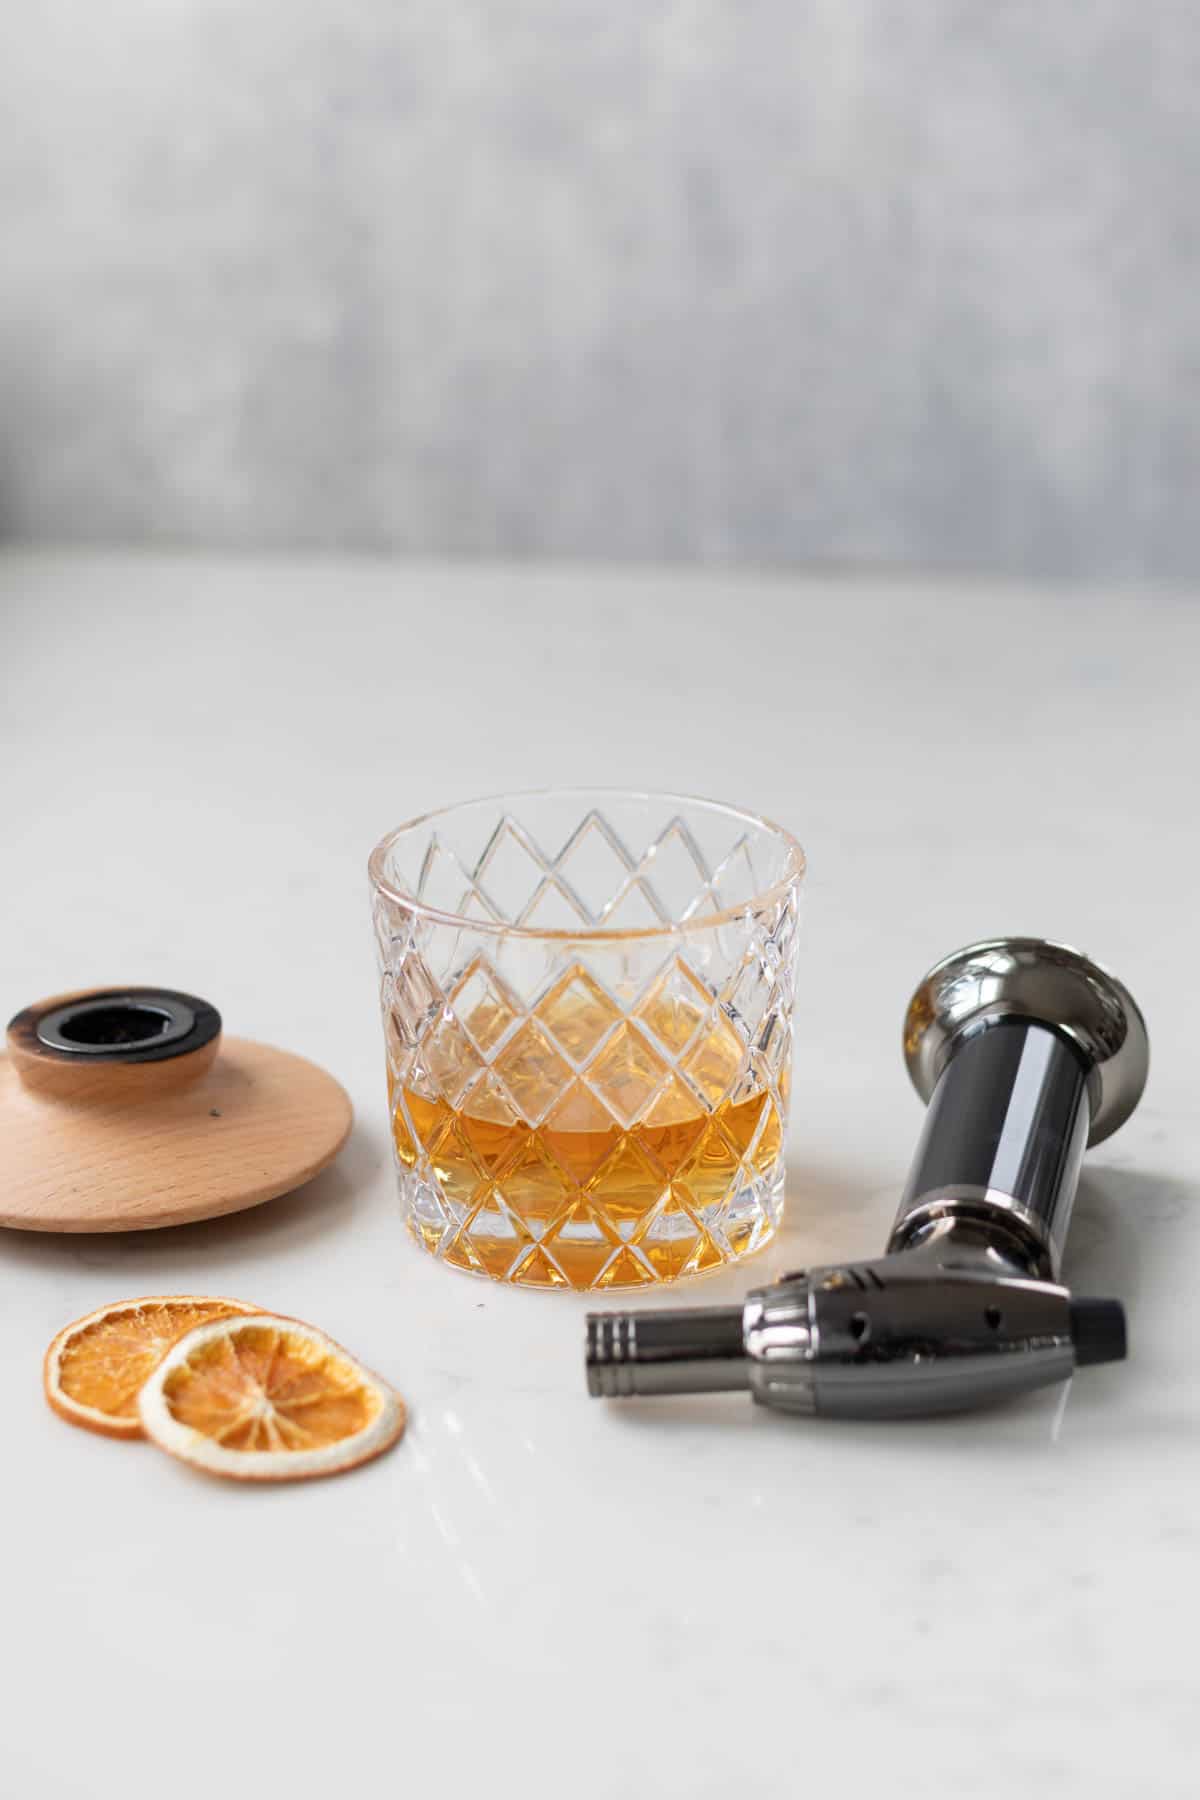 whisky in a glass next to two orange slices and a cocktail smoker